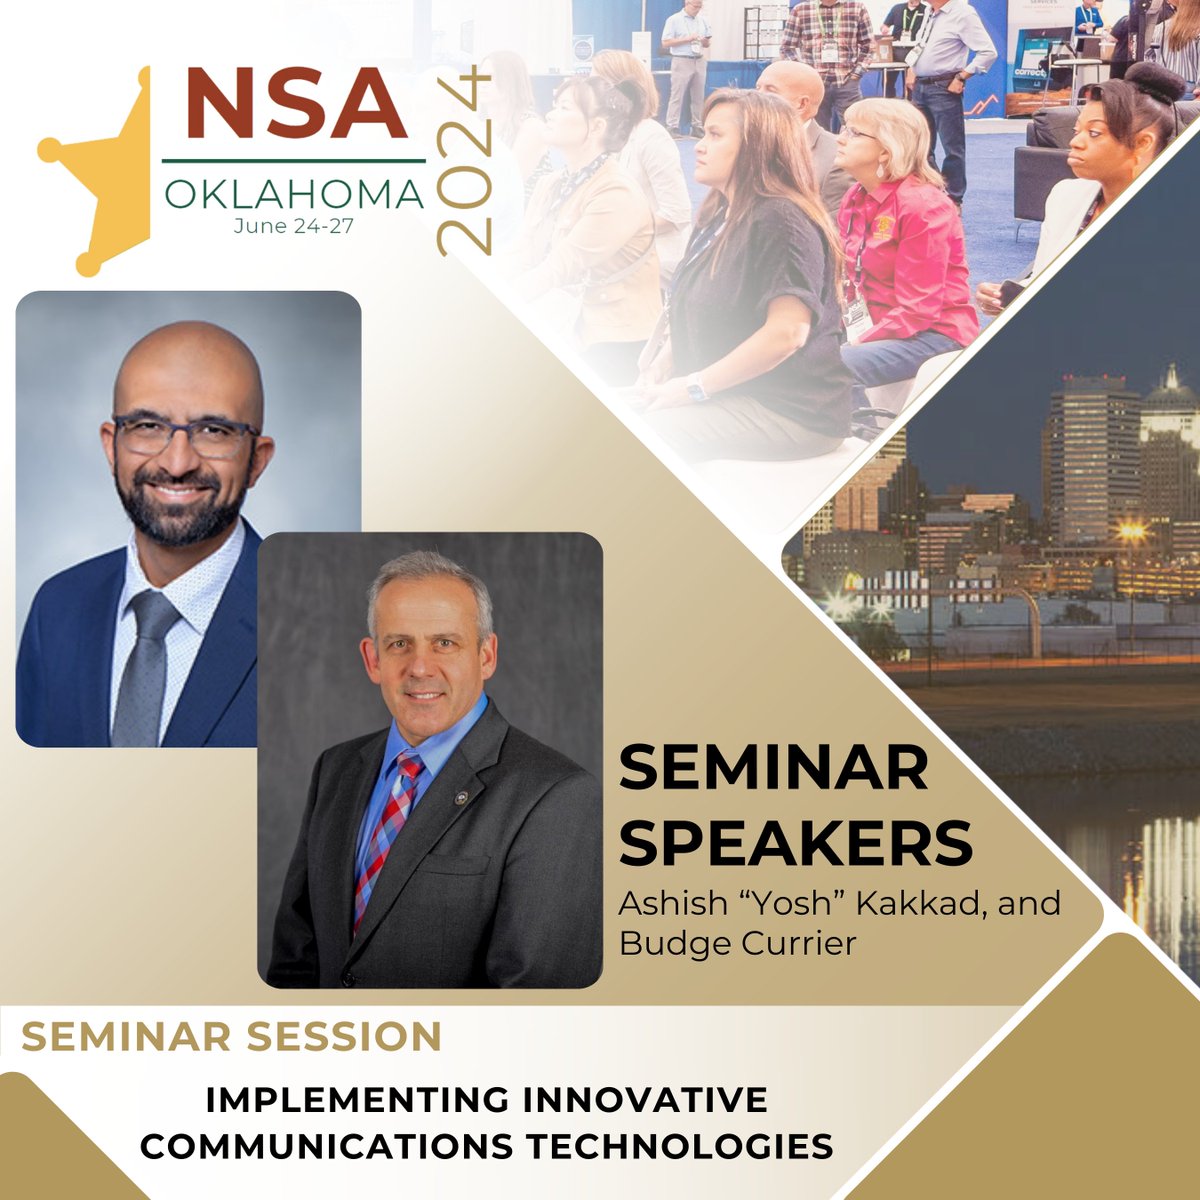 NSA 2024 Annual Conference Speaker Spotlight! #Sheriffs2024 Today we shine a light on Ashish Kakkad, CTO at San Diego County Sheriff’s Department, and Budge Currier, Assistant Director of Public Safety Communications at California Office of Emergency Services. During this